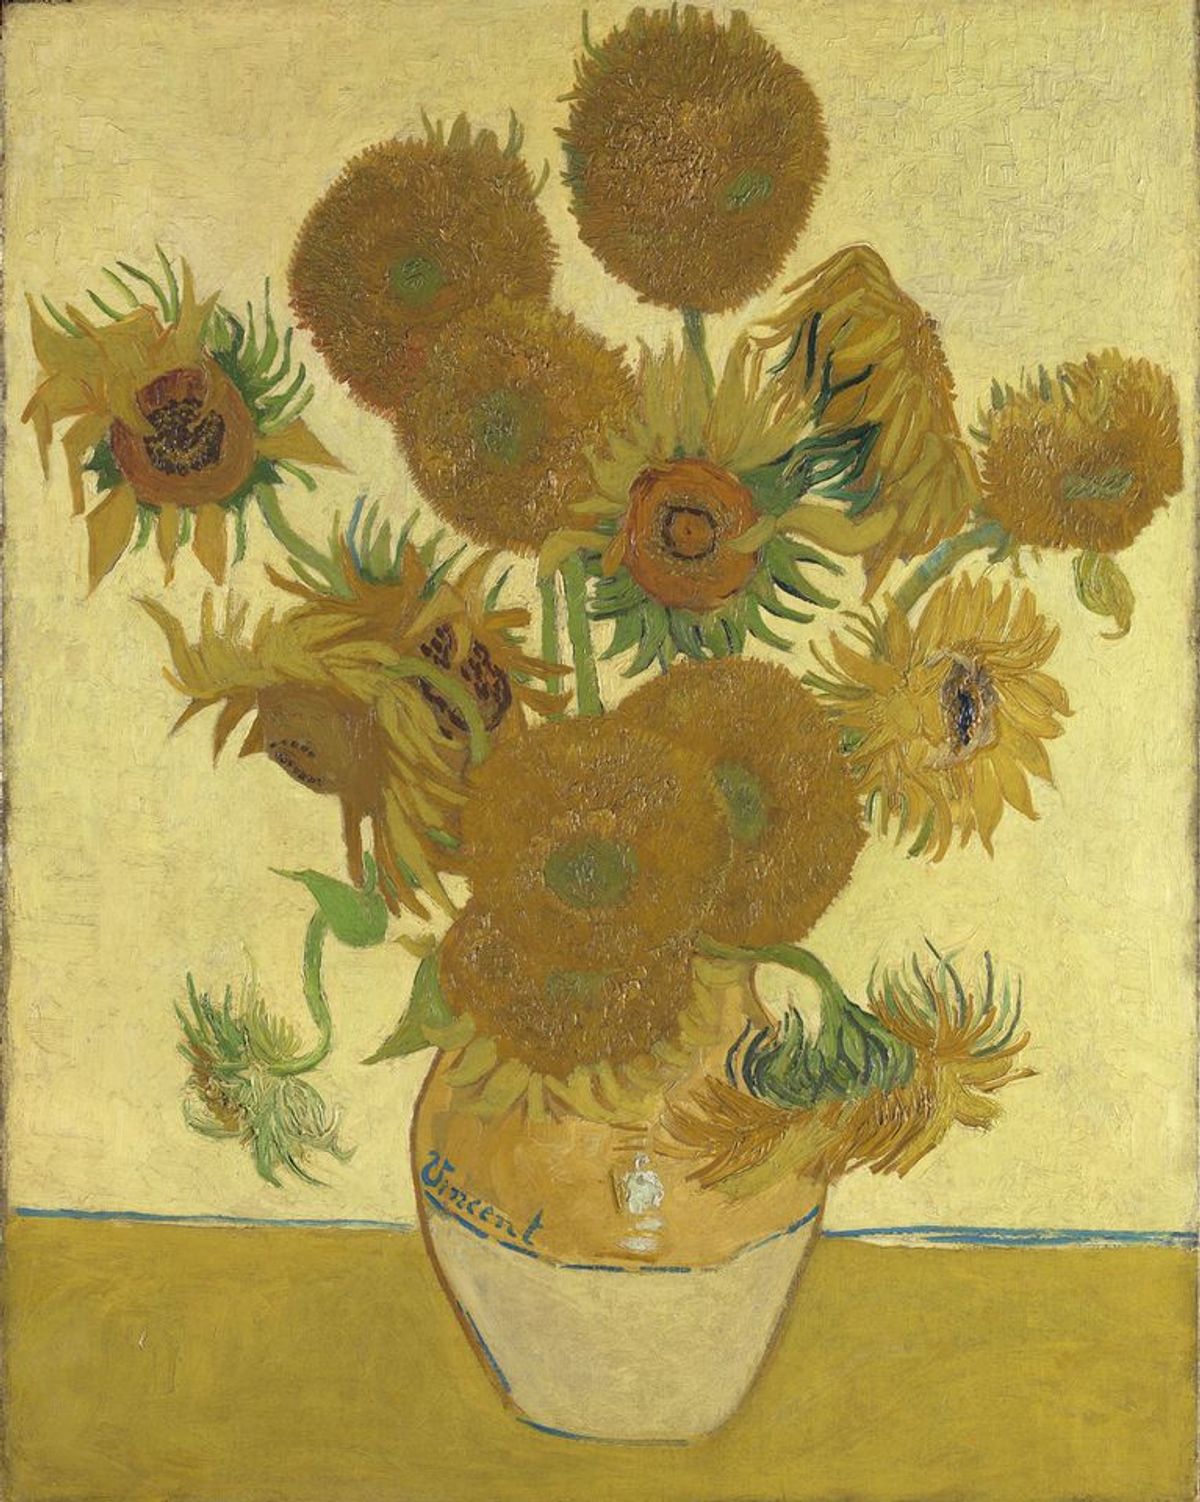 Van Gogh's Sunflowers (1888) in the National Gallery is going to Japan © The National Gallery, London/ Bought, Courtauld Fund, 1924